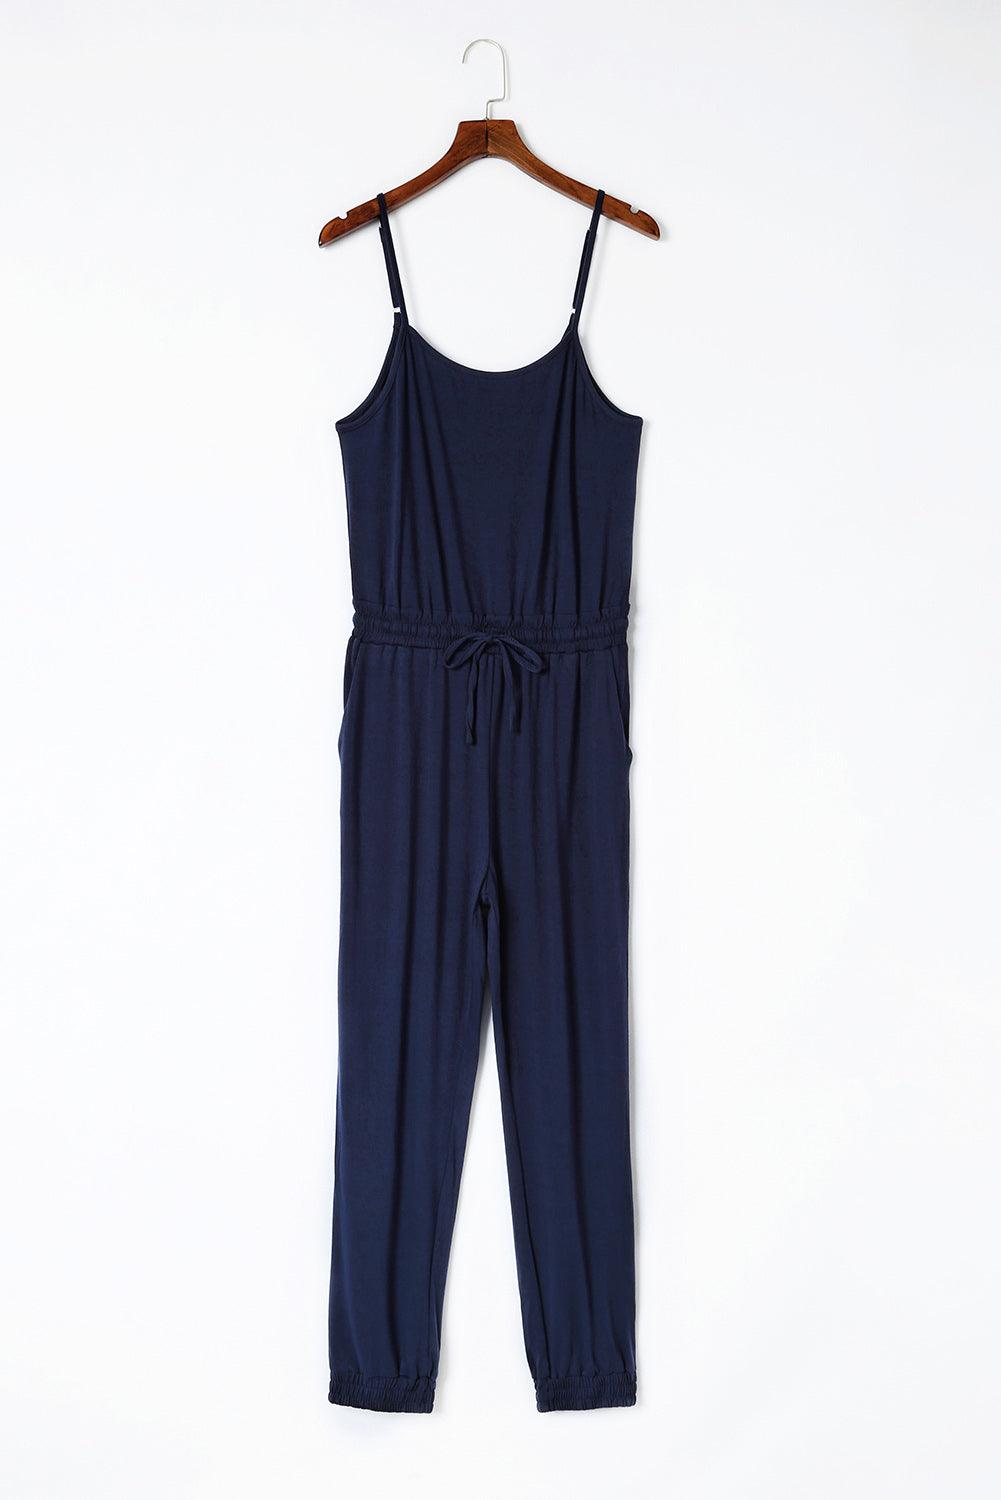 Spaghetti Strap Jumpsuit with Pockets - Olive Ave